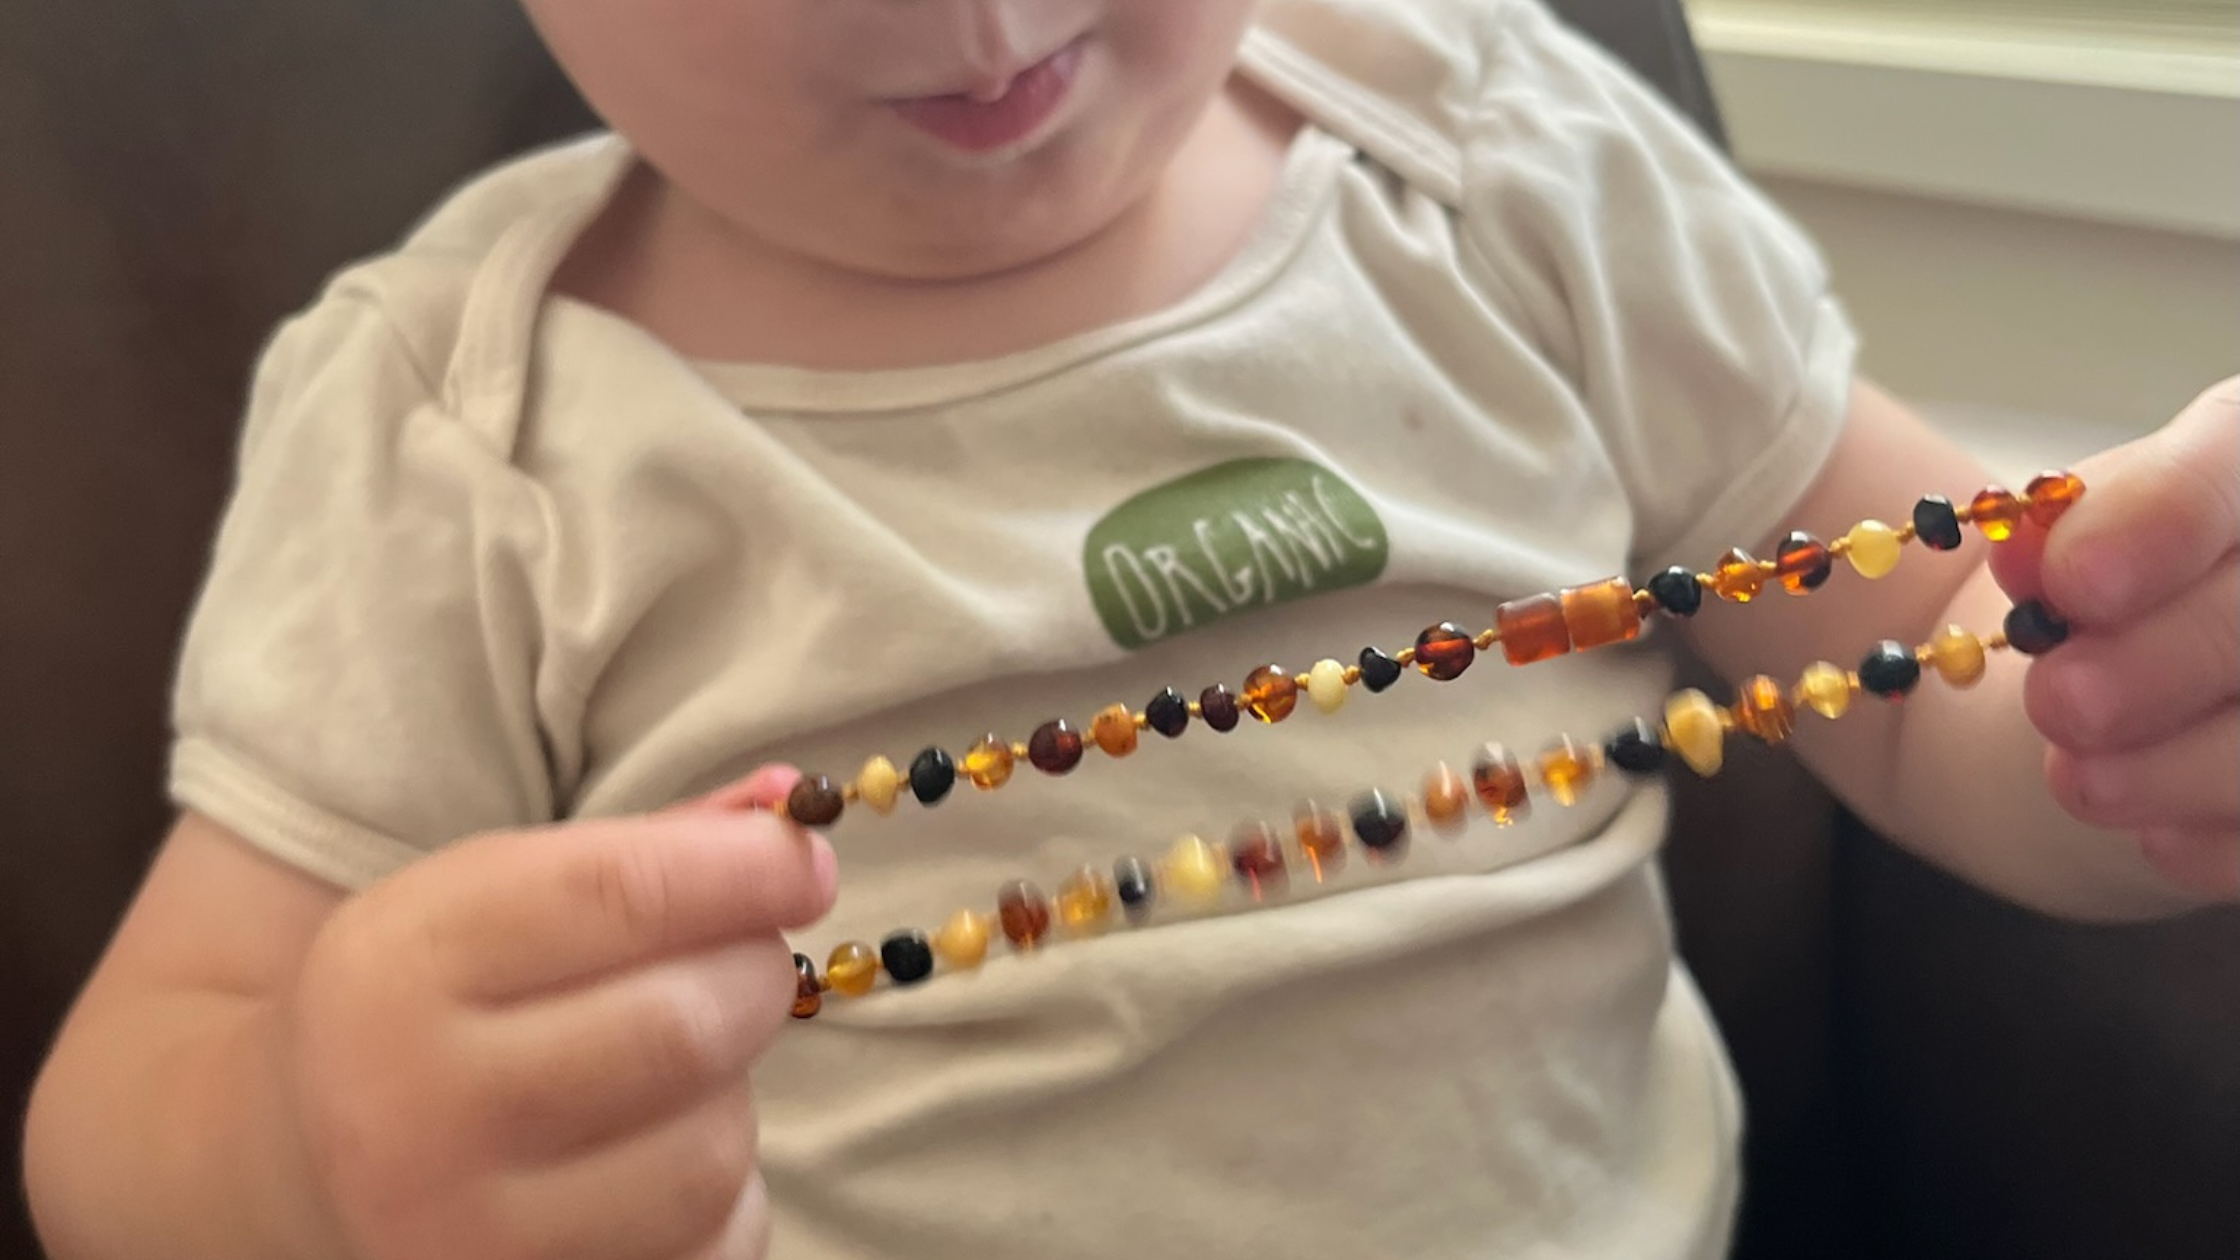 Are Baltic amber teething necklaces safe?